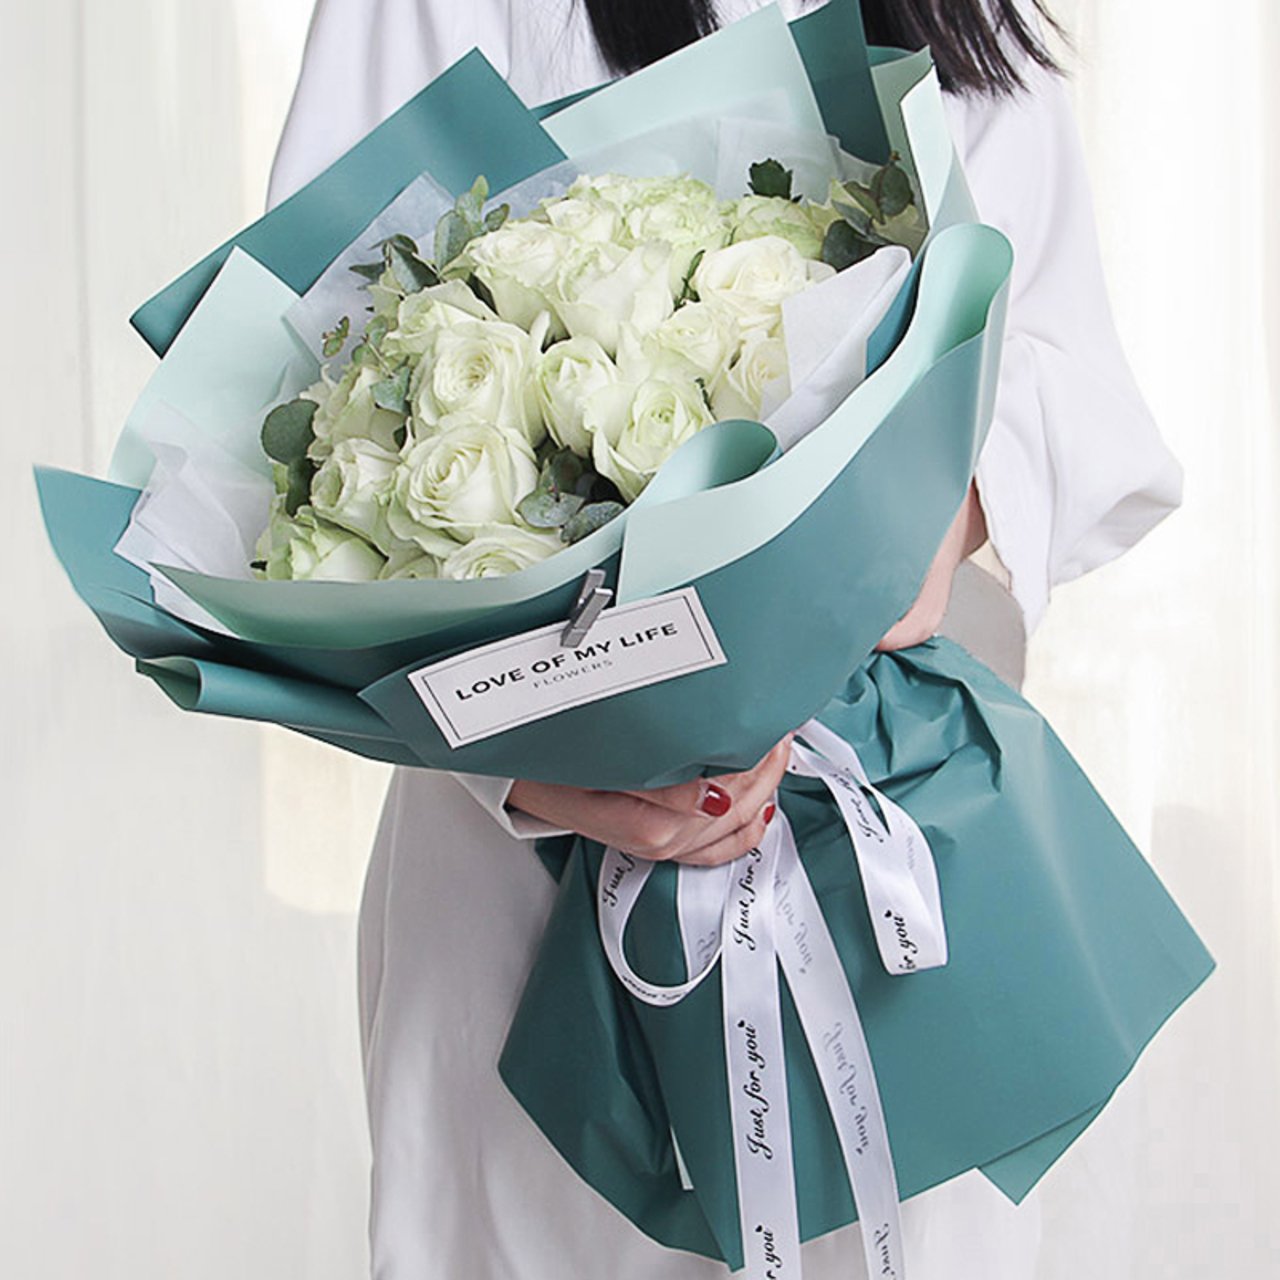 Pure Beauty(
33 white roses)